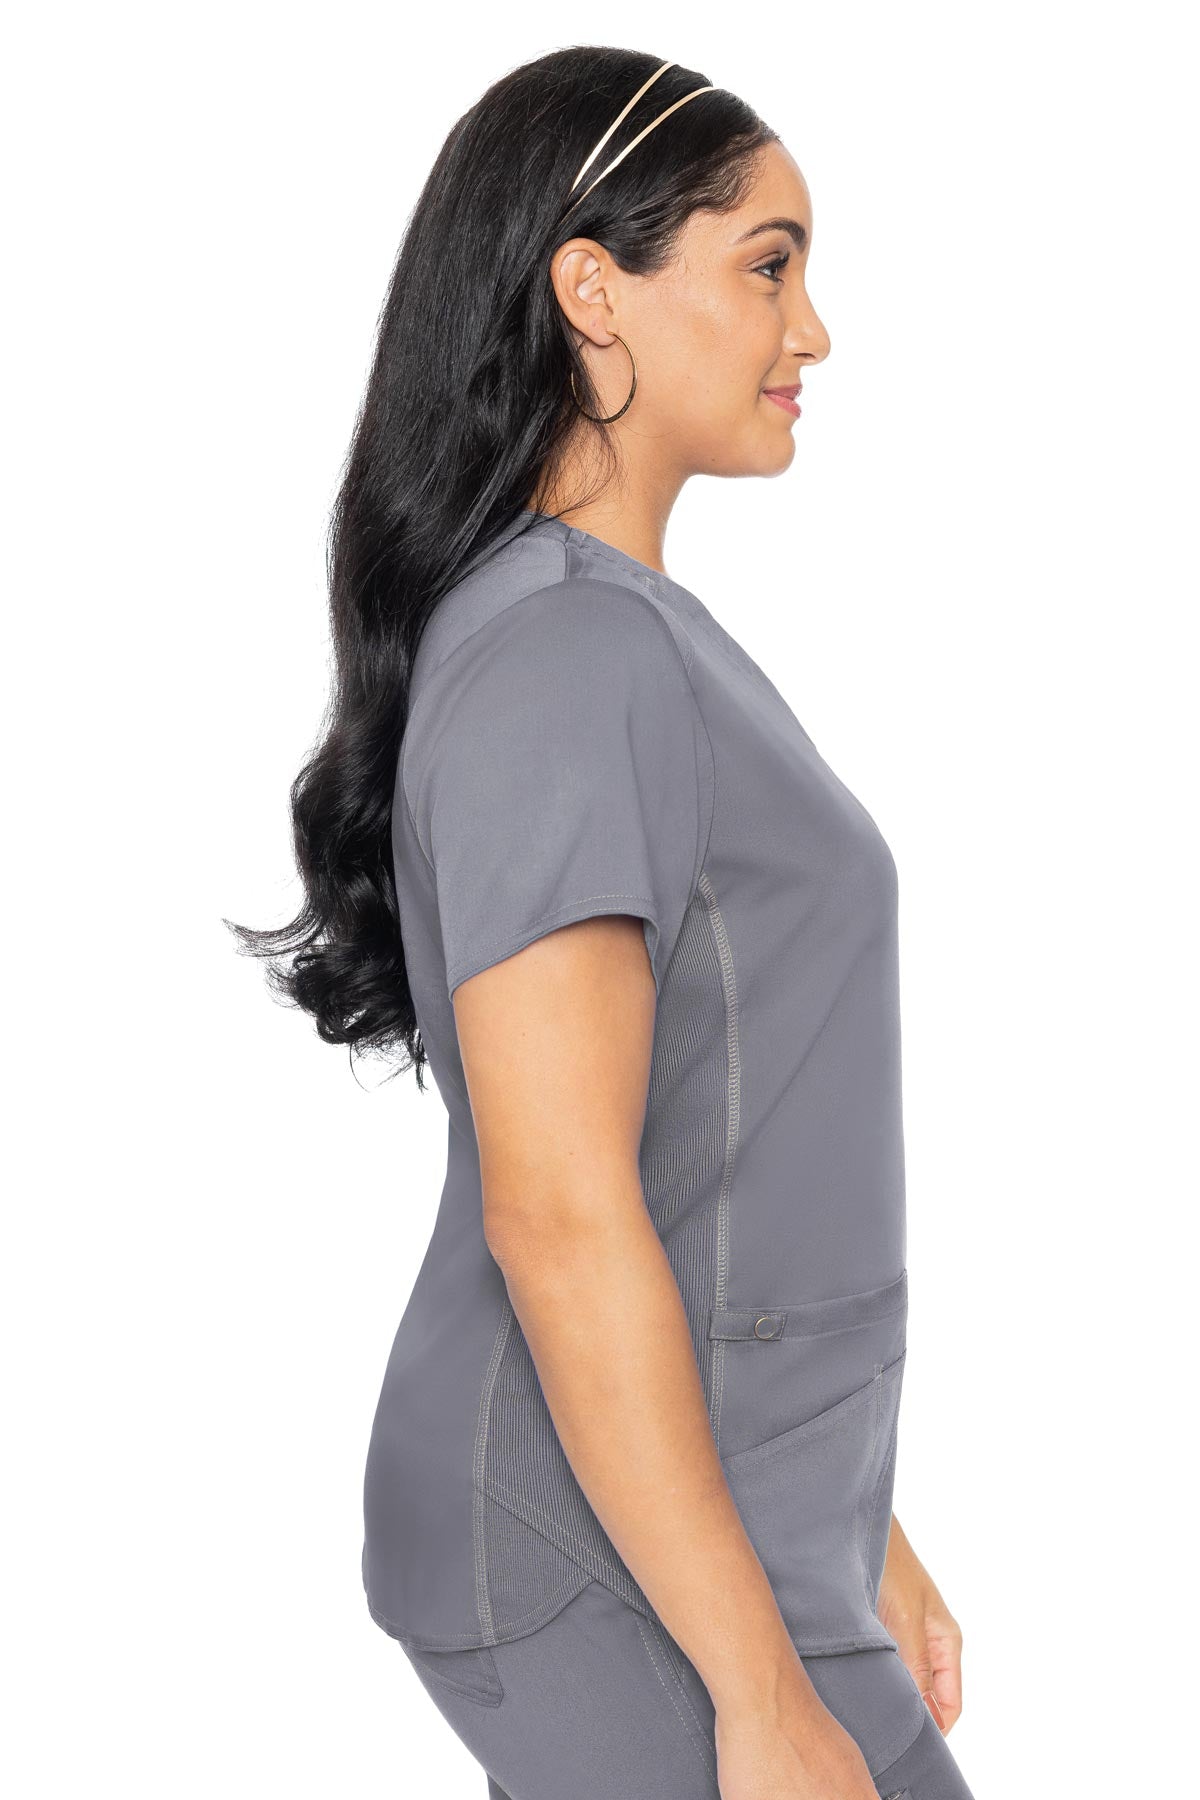 Med Couture V-Neck Shirttail Racerback Top XS-3XL / Cloud